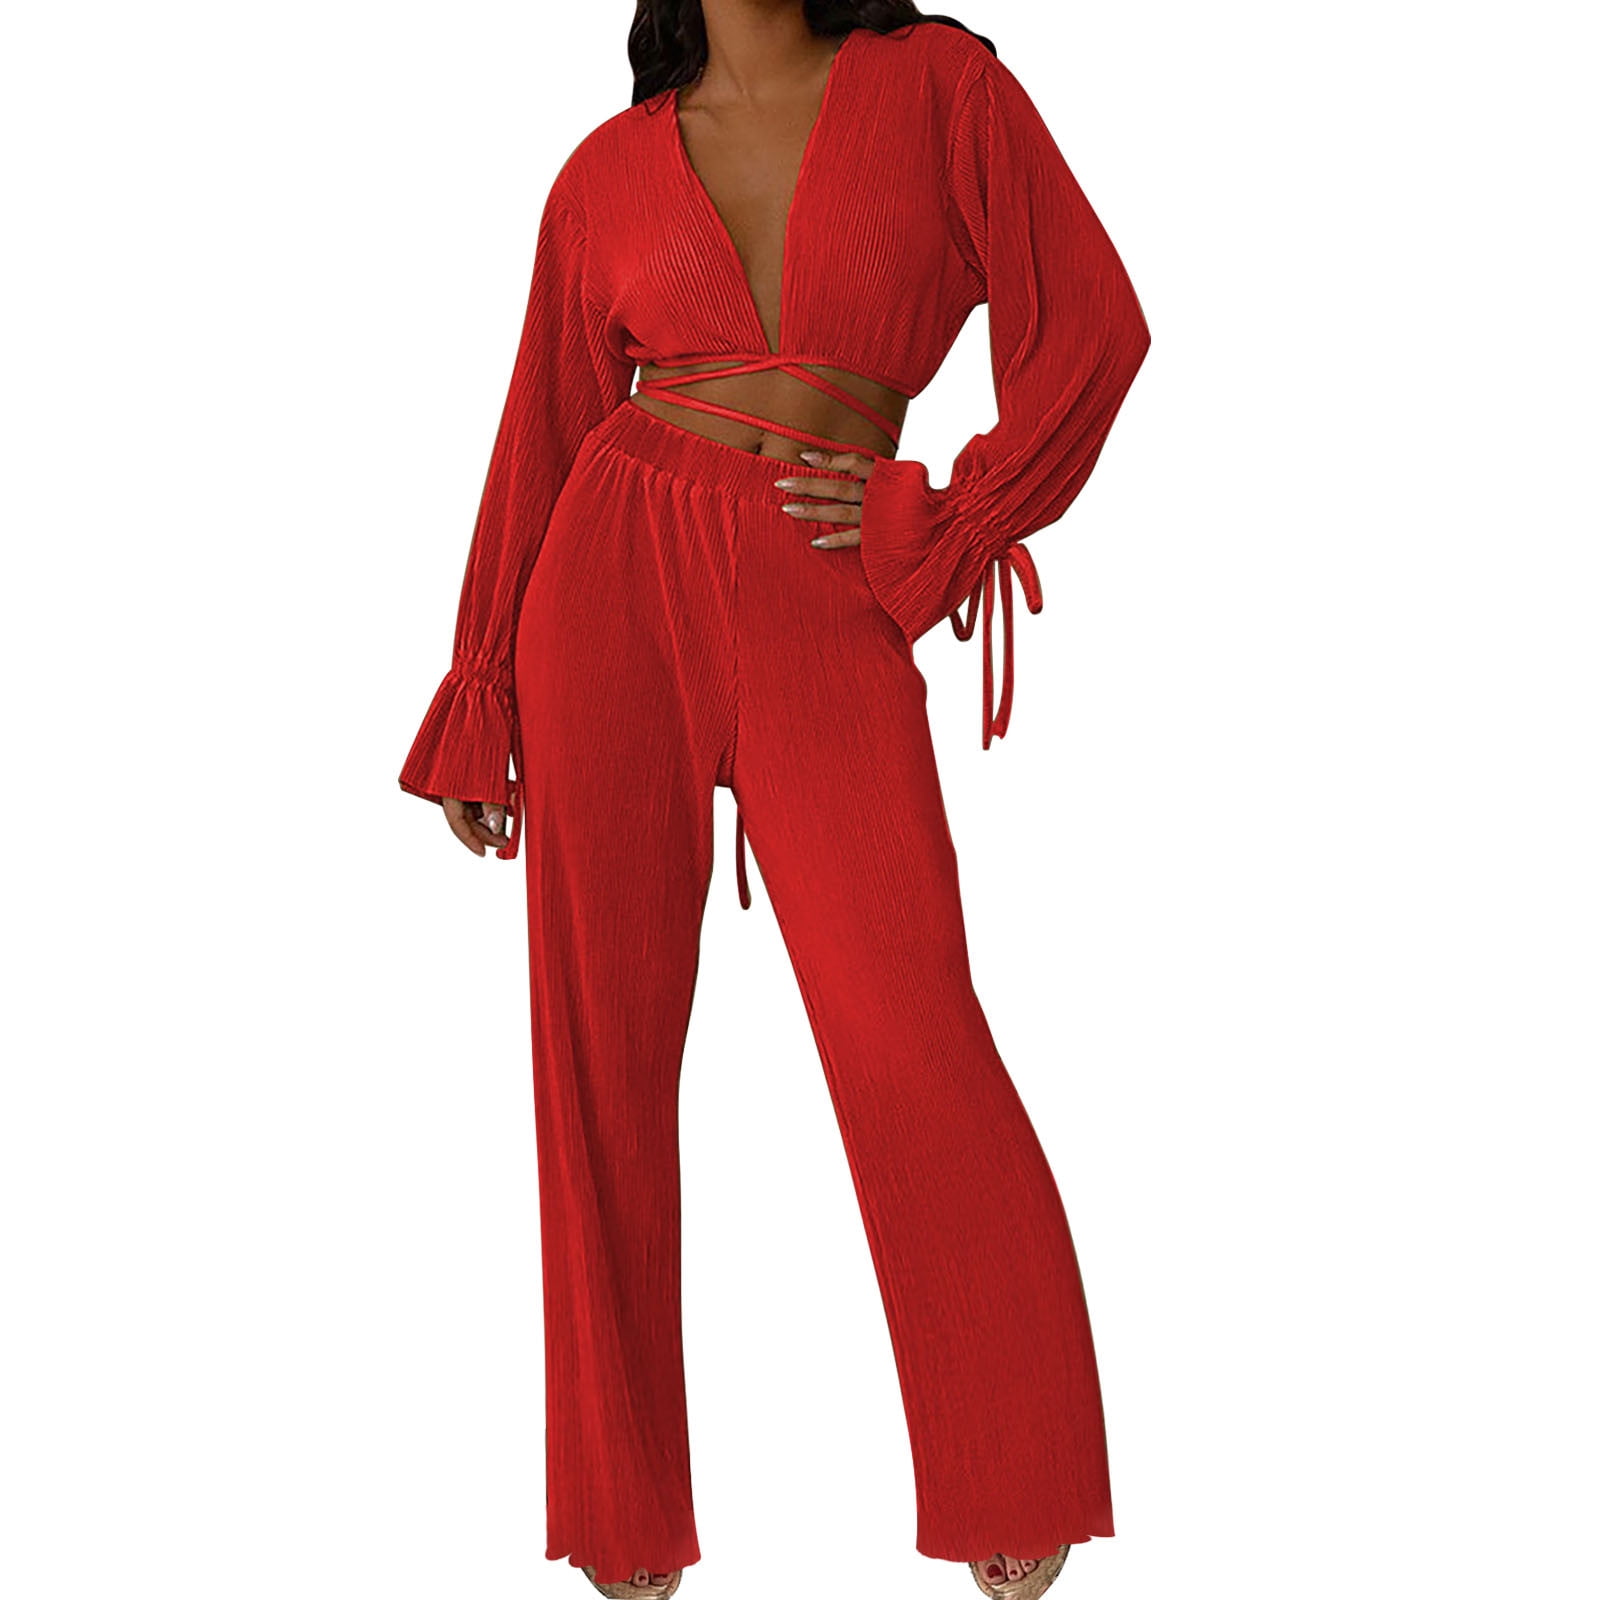 Womens Long Sleeve Shirt Mesh Top Blouse + Pant Two Piece Outfit Red L ...